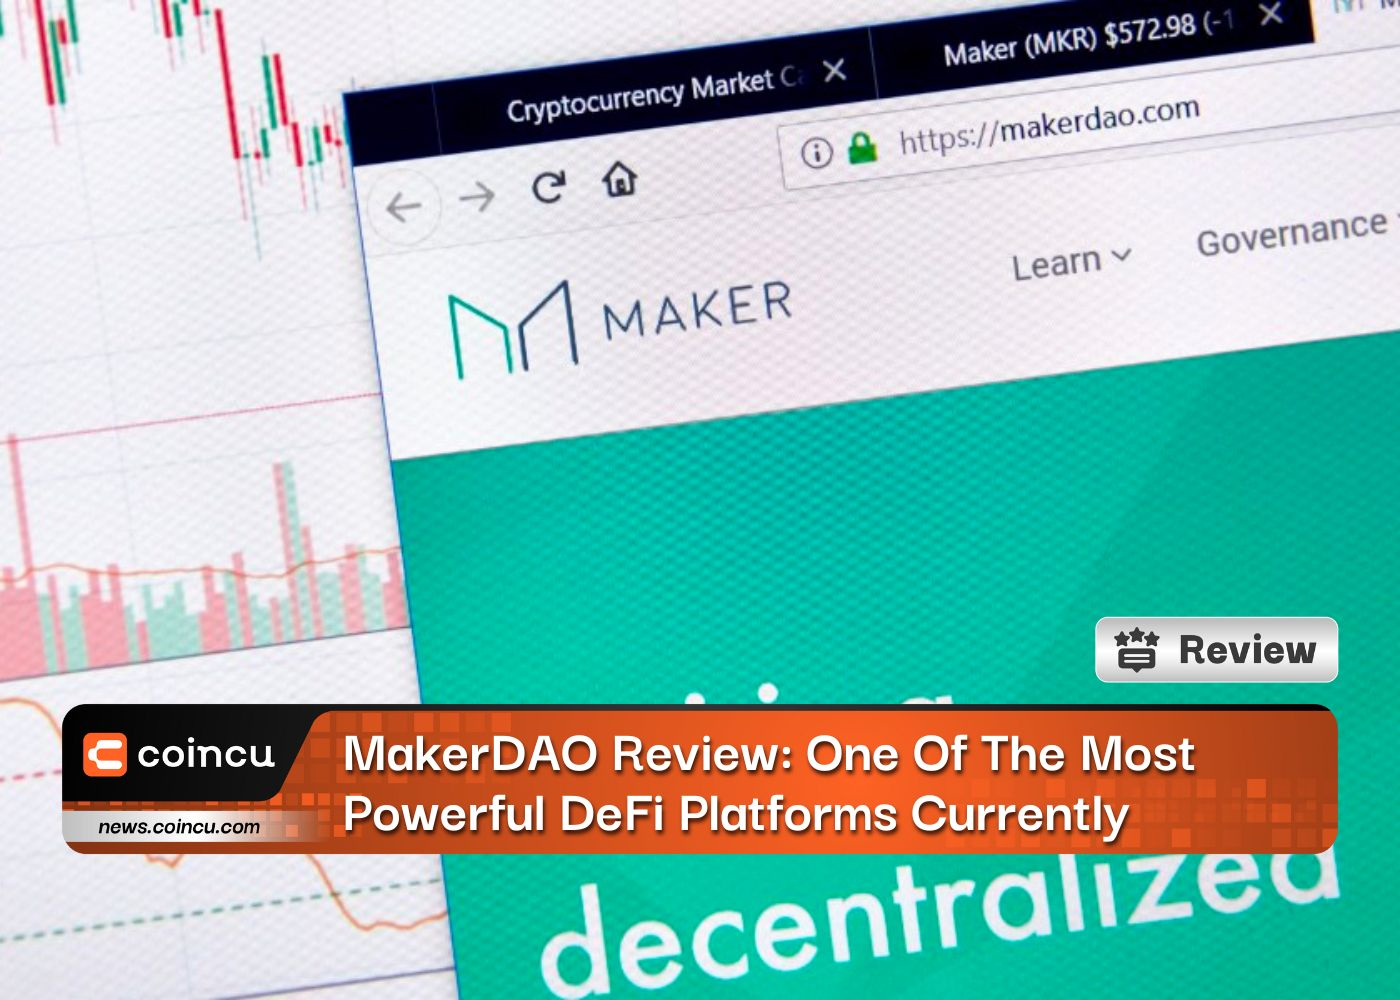 MakerDAO Review: One Of The Most Powerful DeFi Platforms Currently